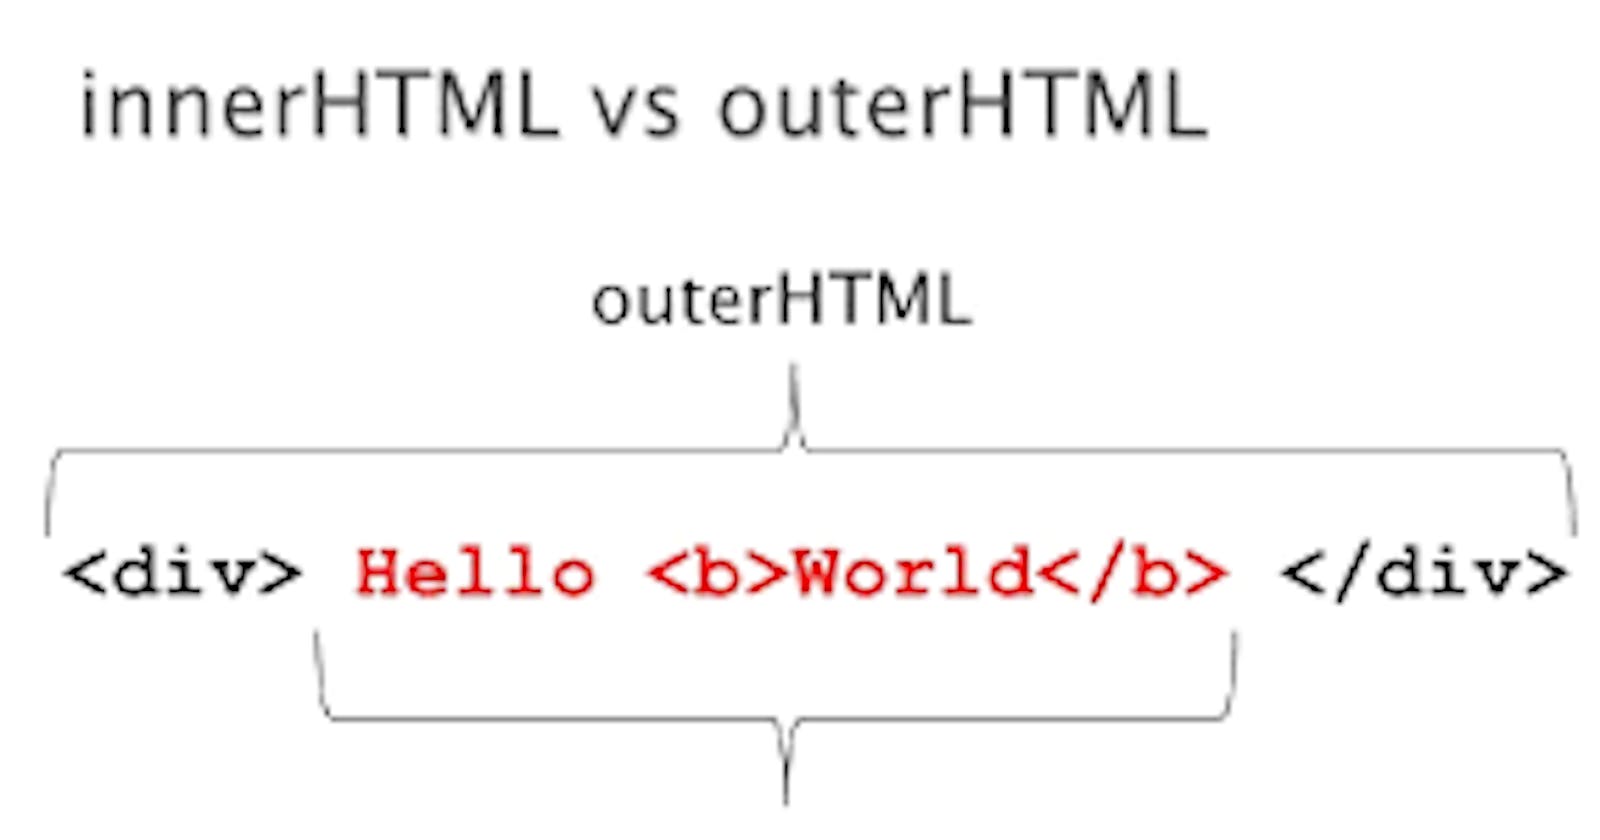 Difference Between InnerHTML and outerHTML